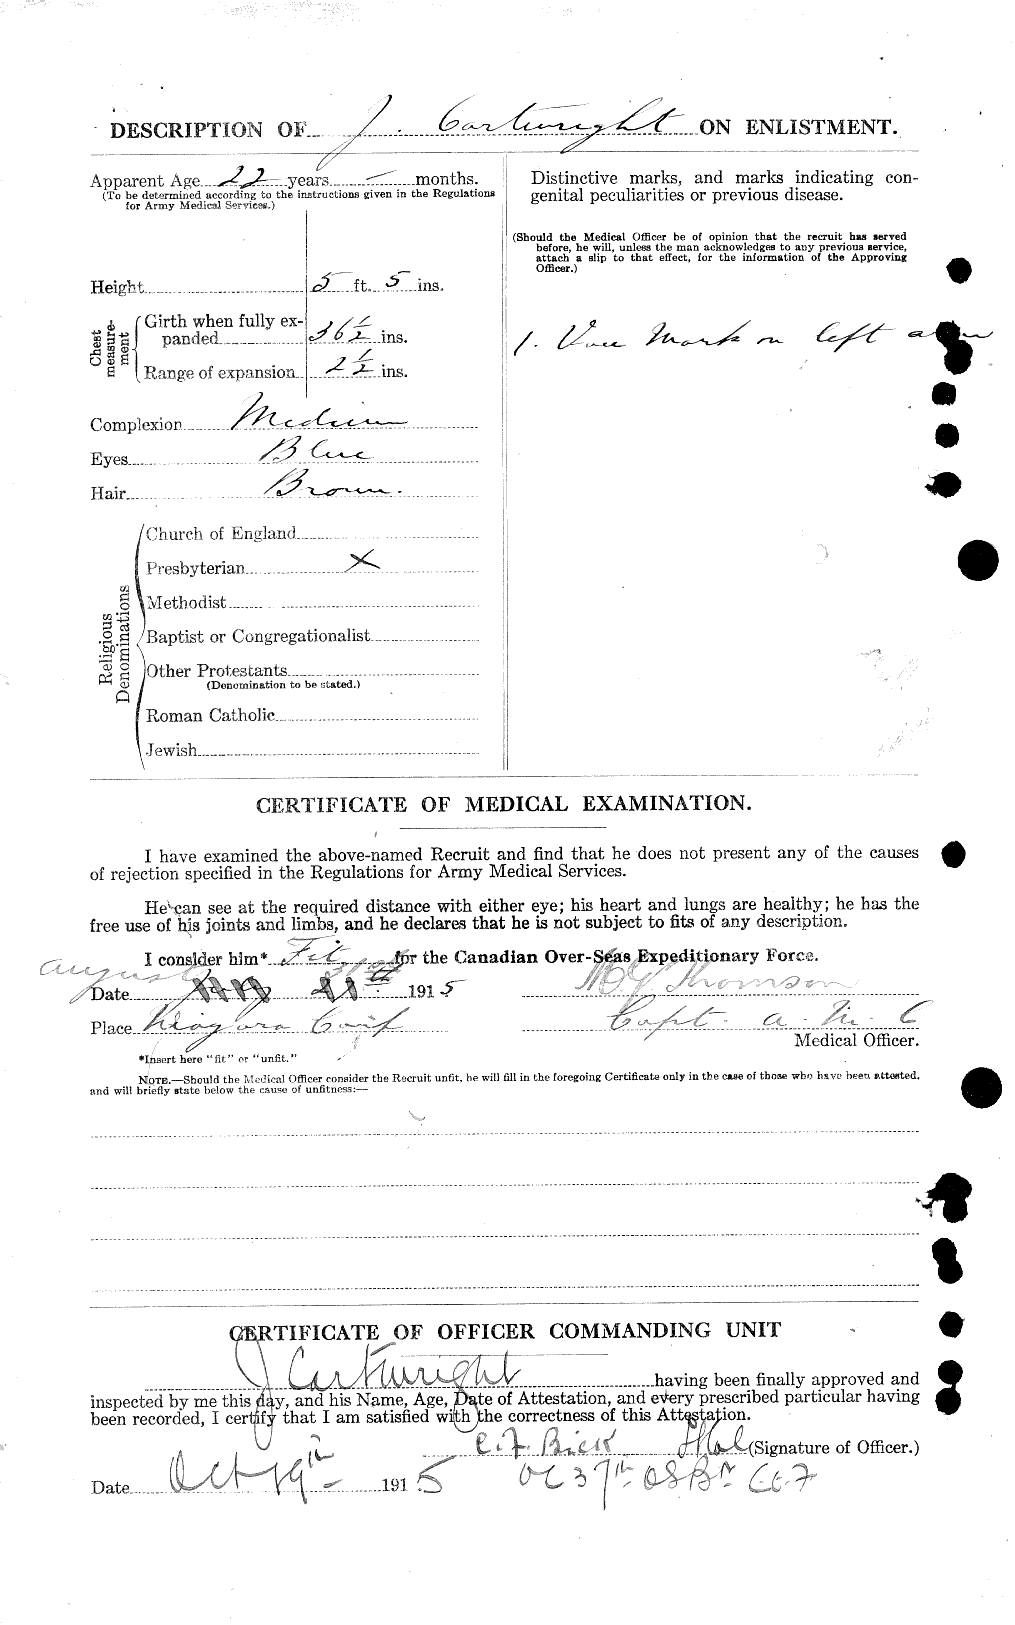 Personnel Records of the First World War - CEF 011593b